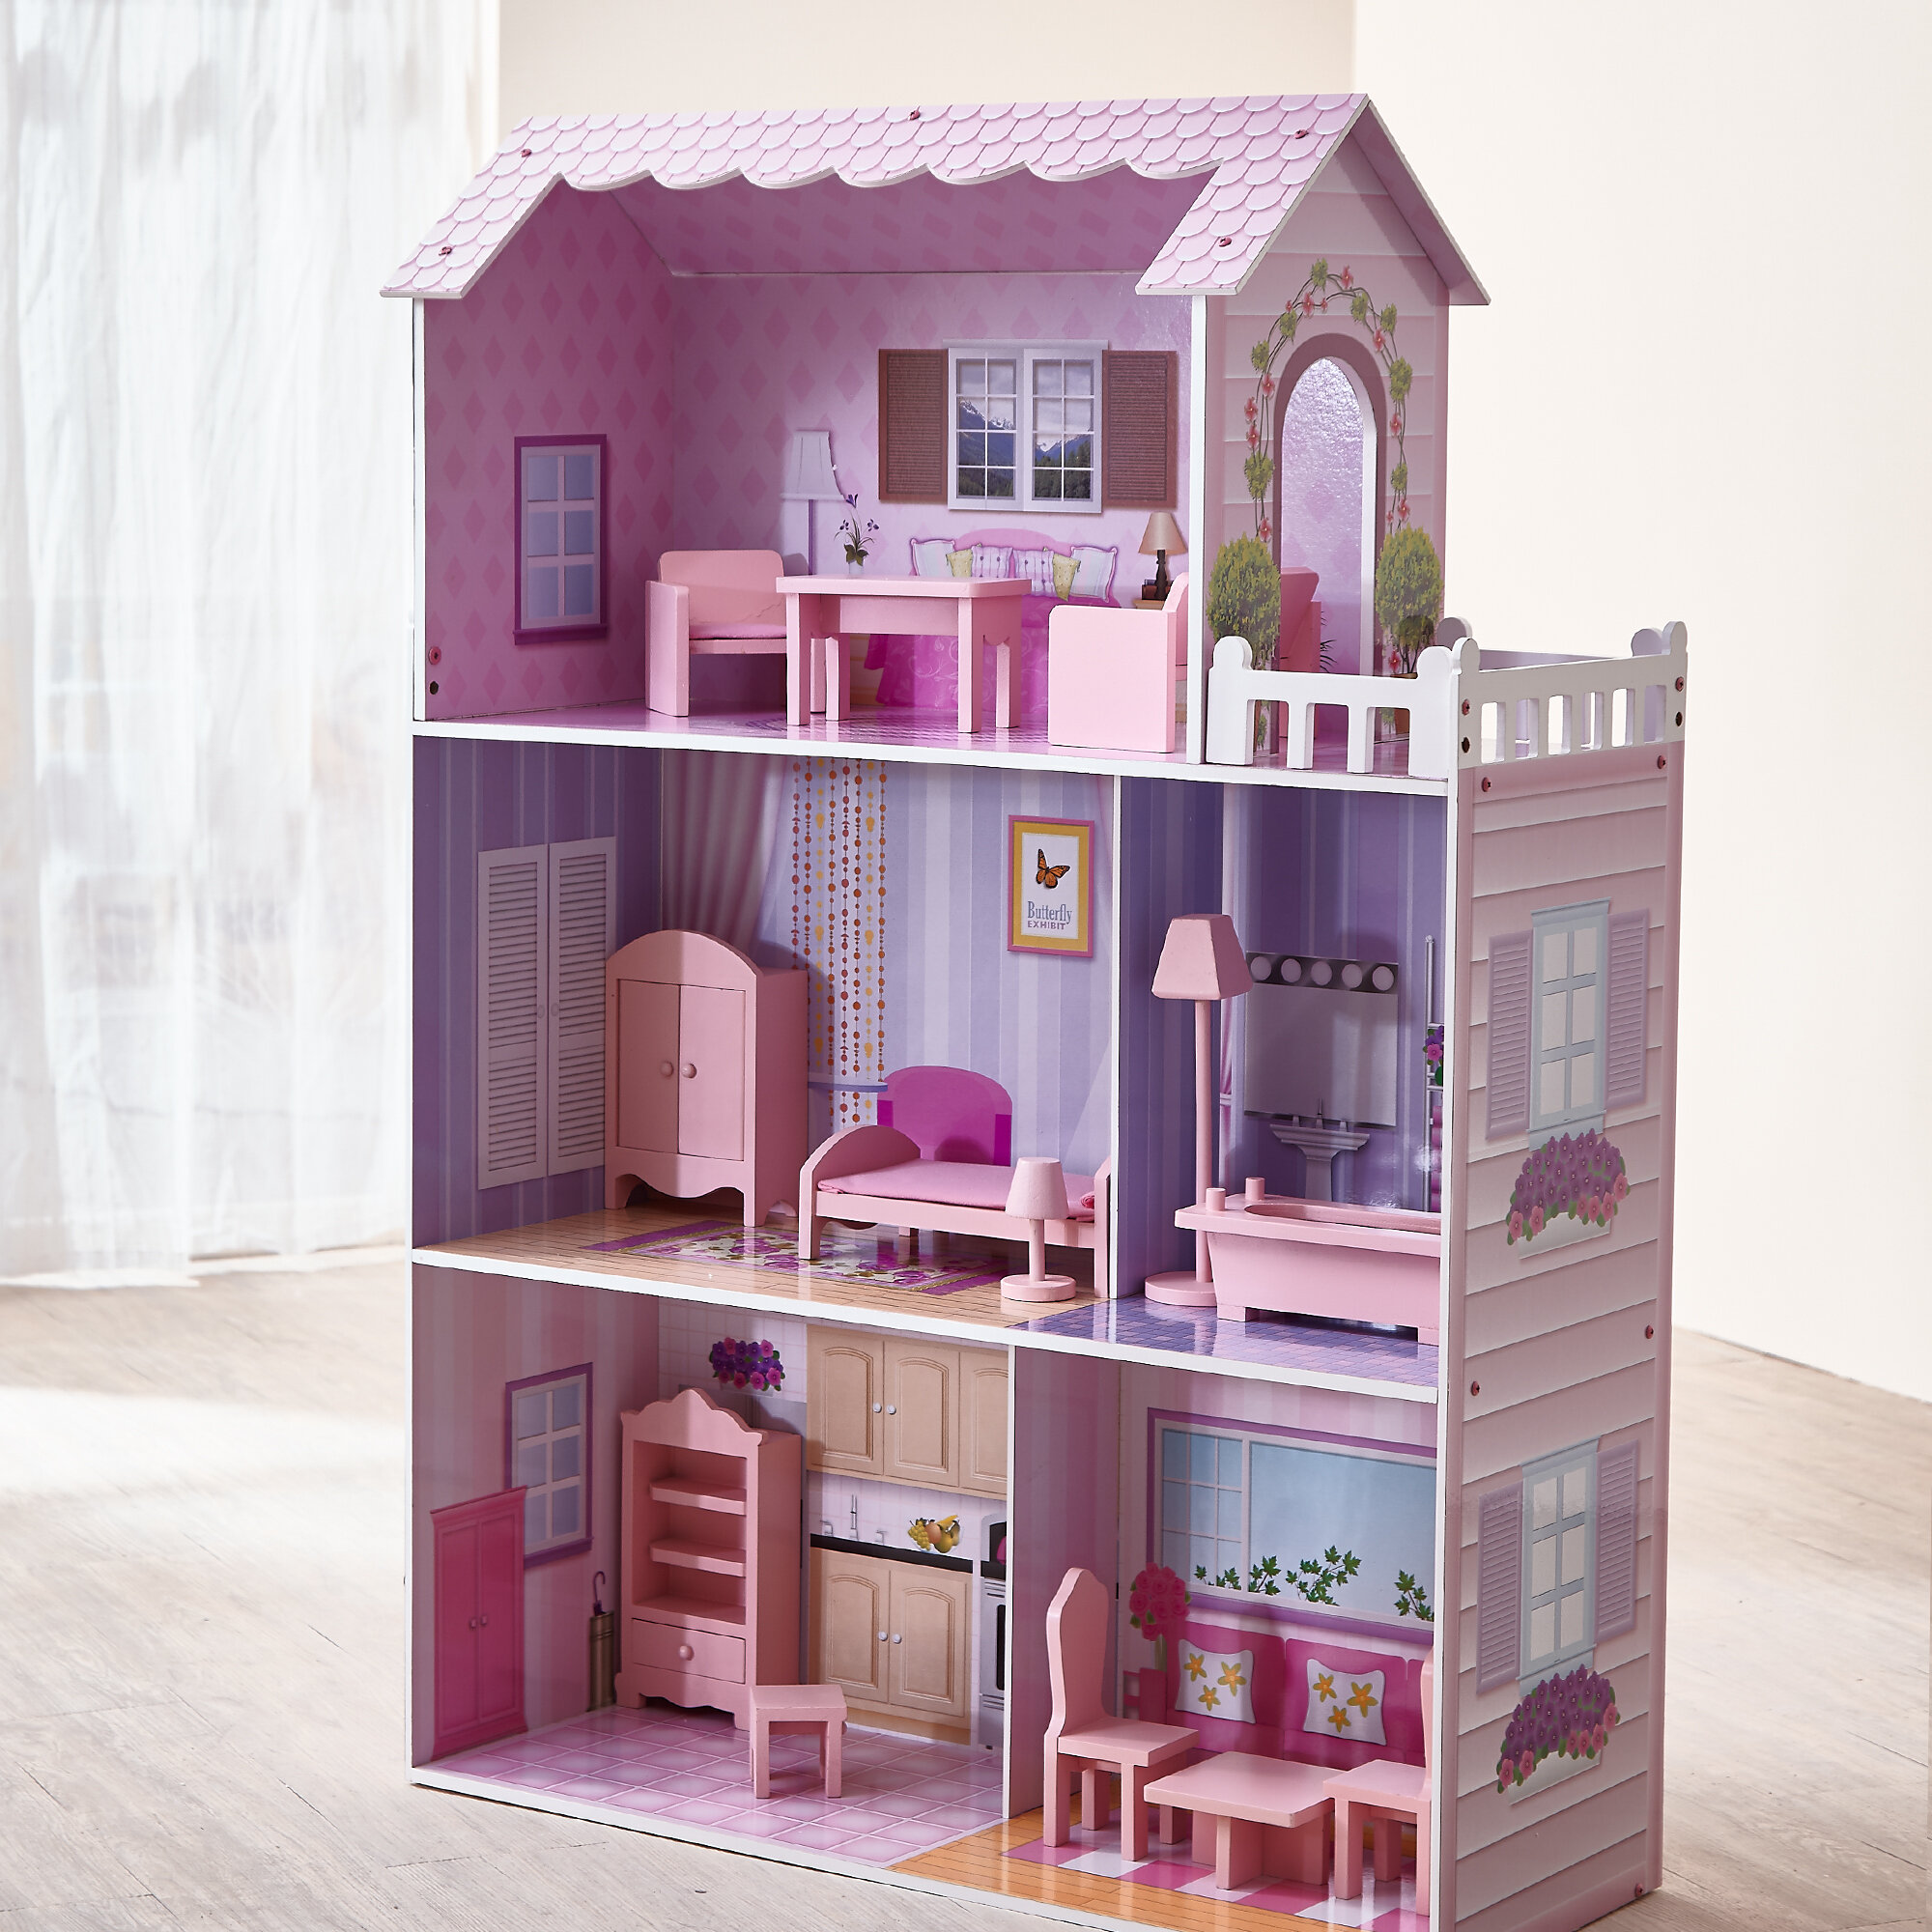 90cm H New Kids Wooden Fantasy Doll House Three Floor Mansion With Furniture 